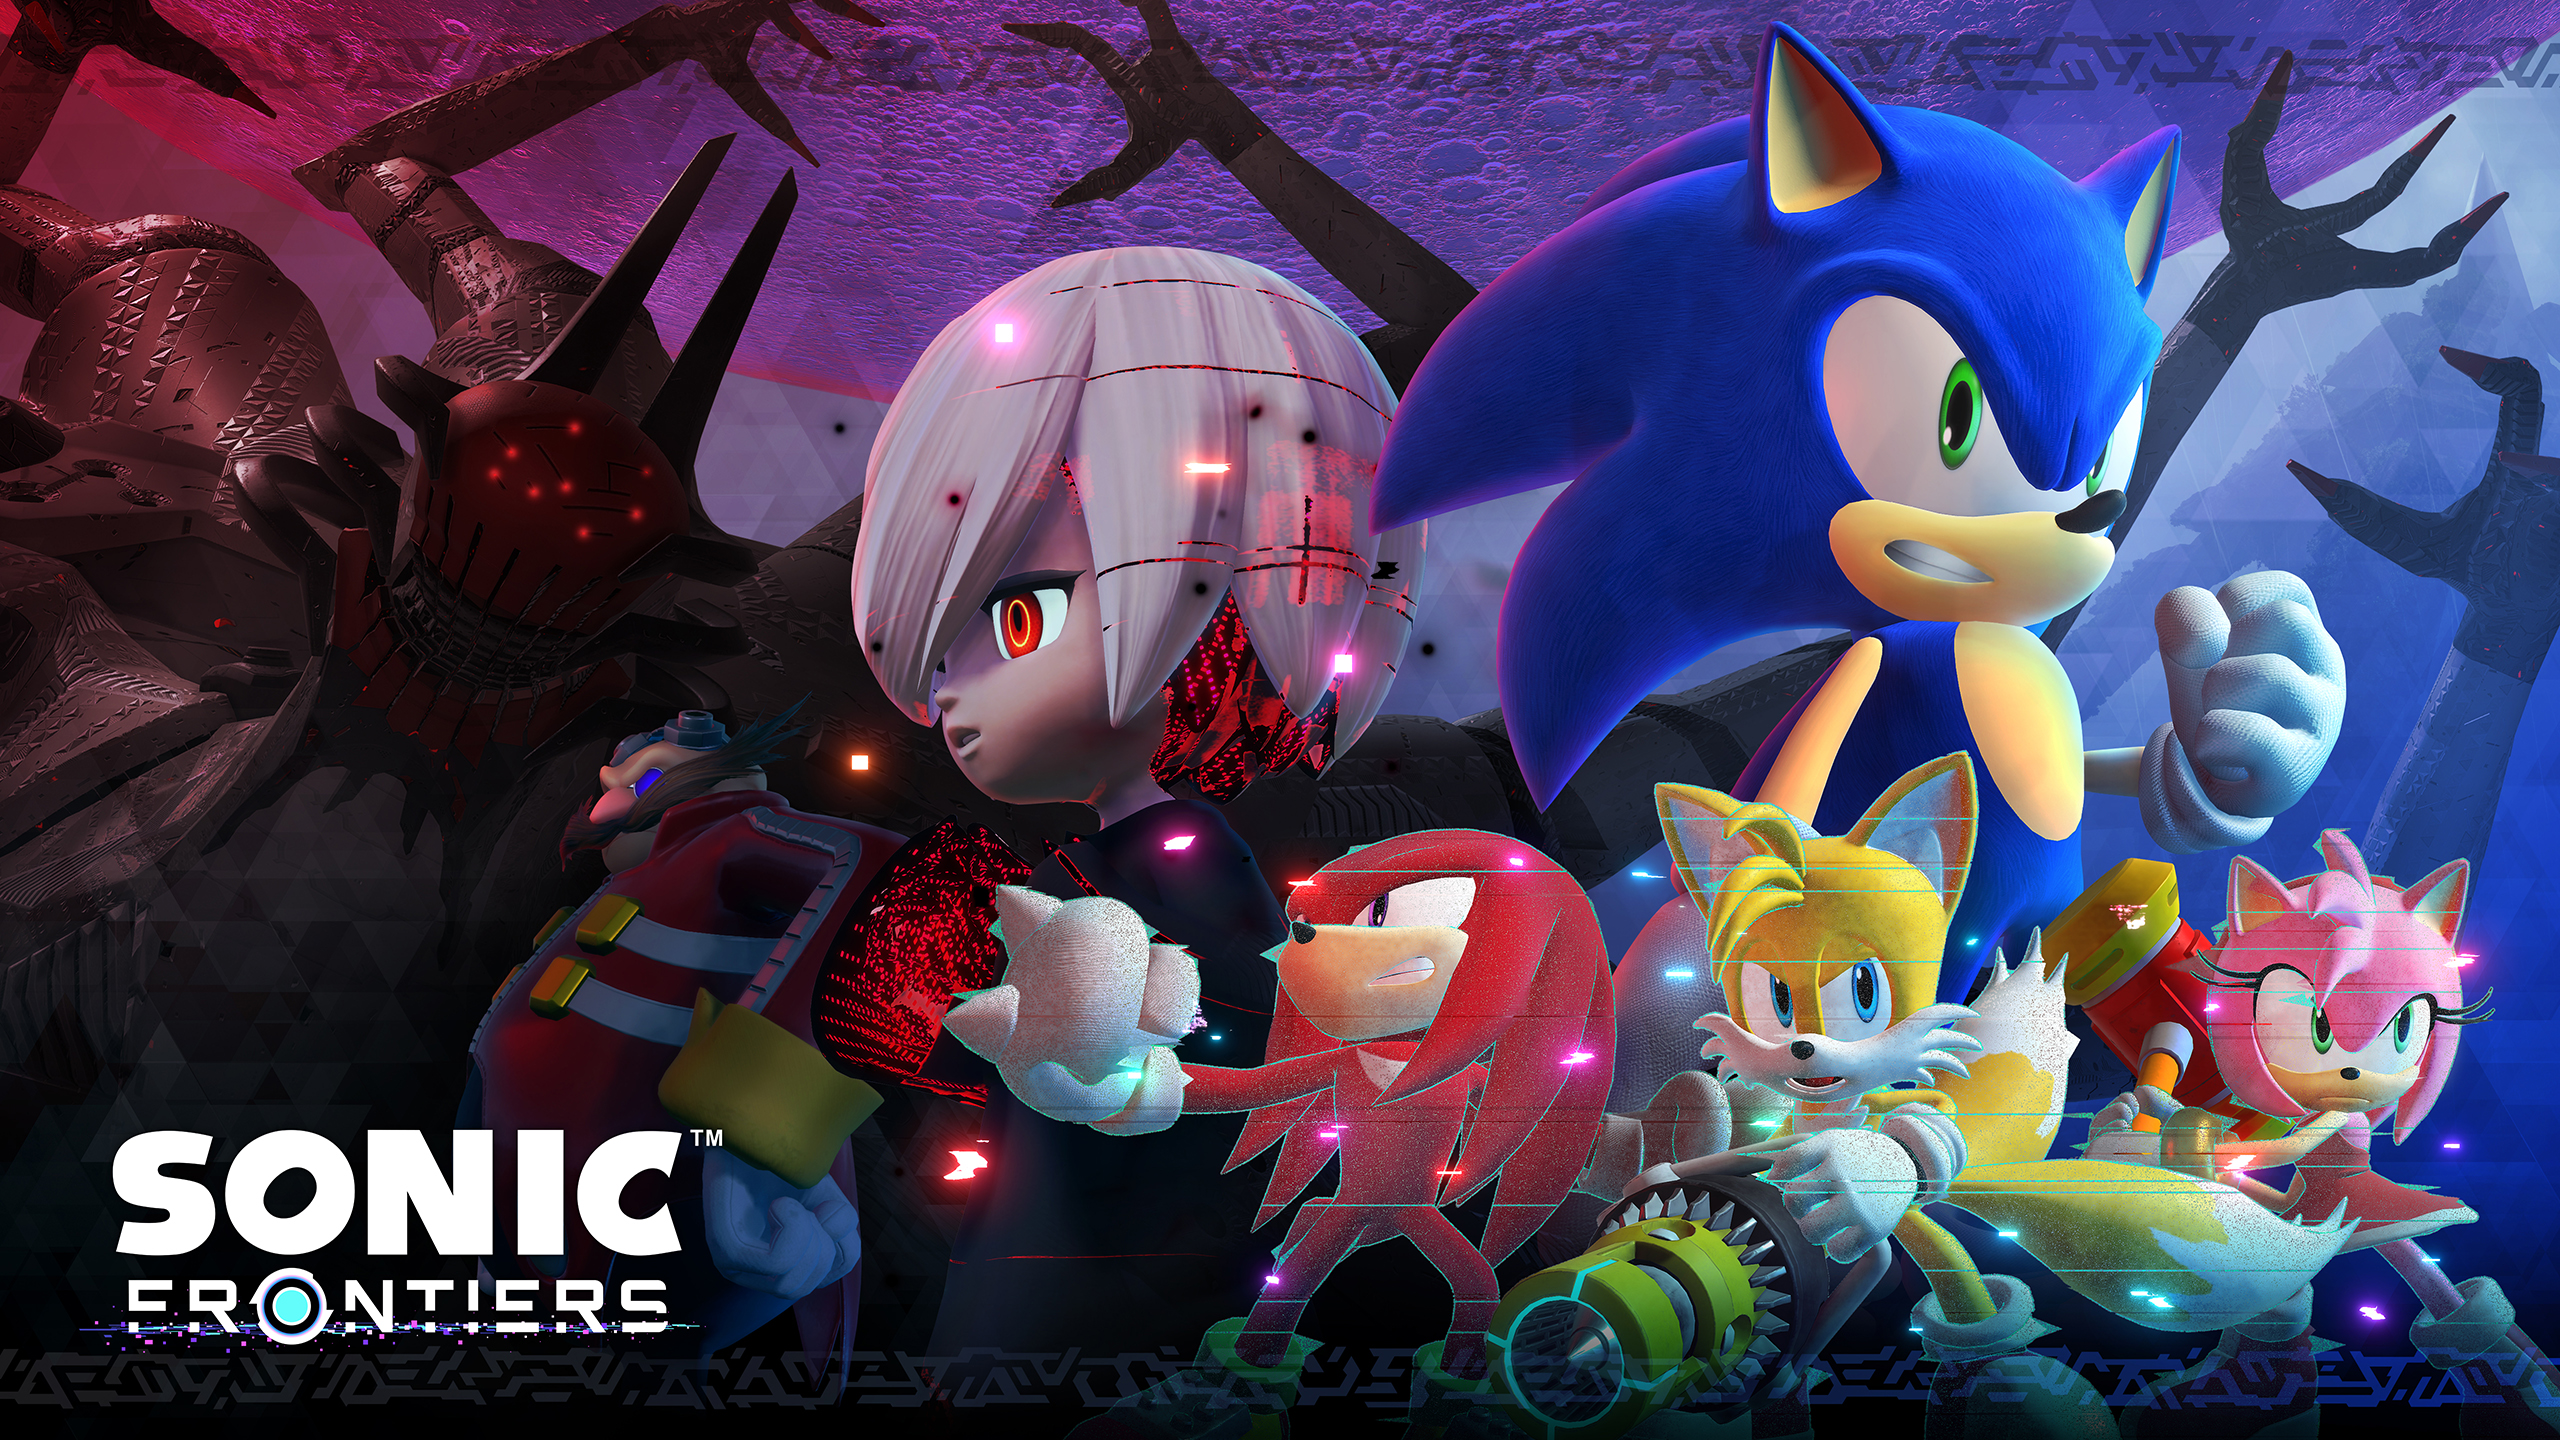 New Sonic Frontiers: The Final Horizon Update Adjusts Difficulty and Controls for Amy, Tails & Knuckles